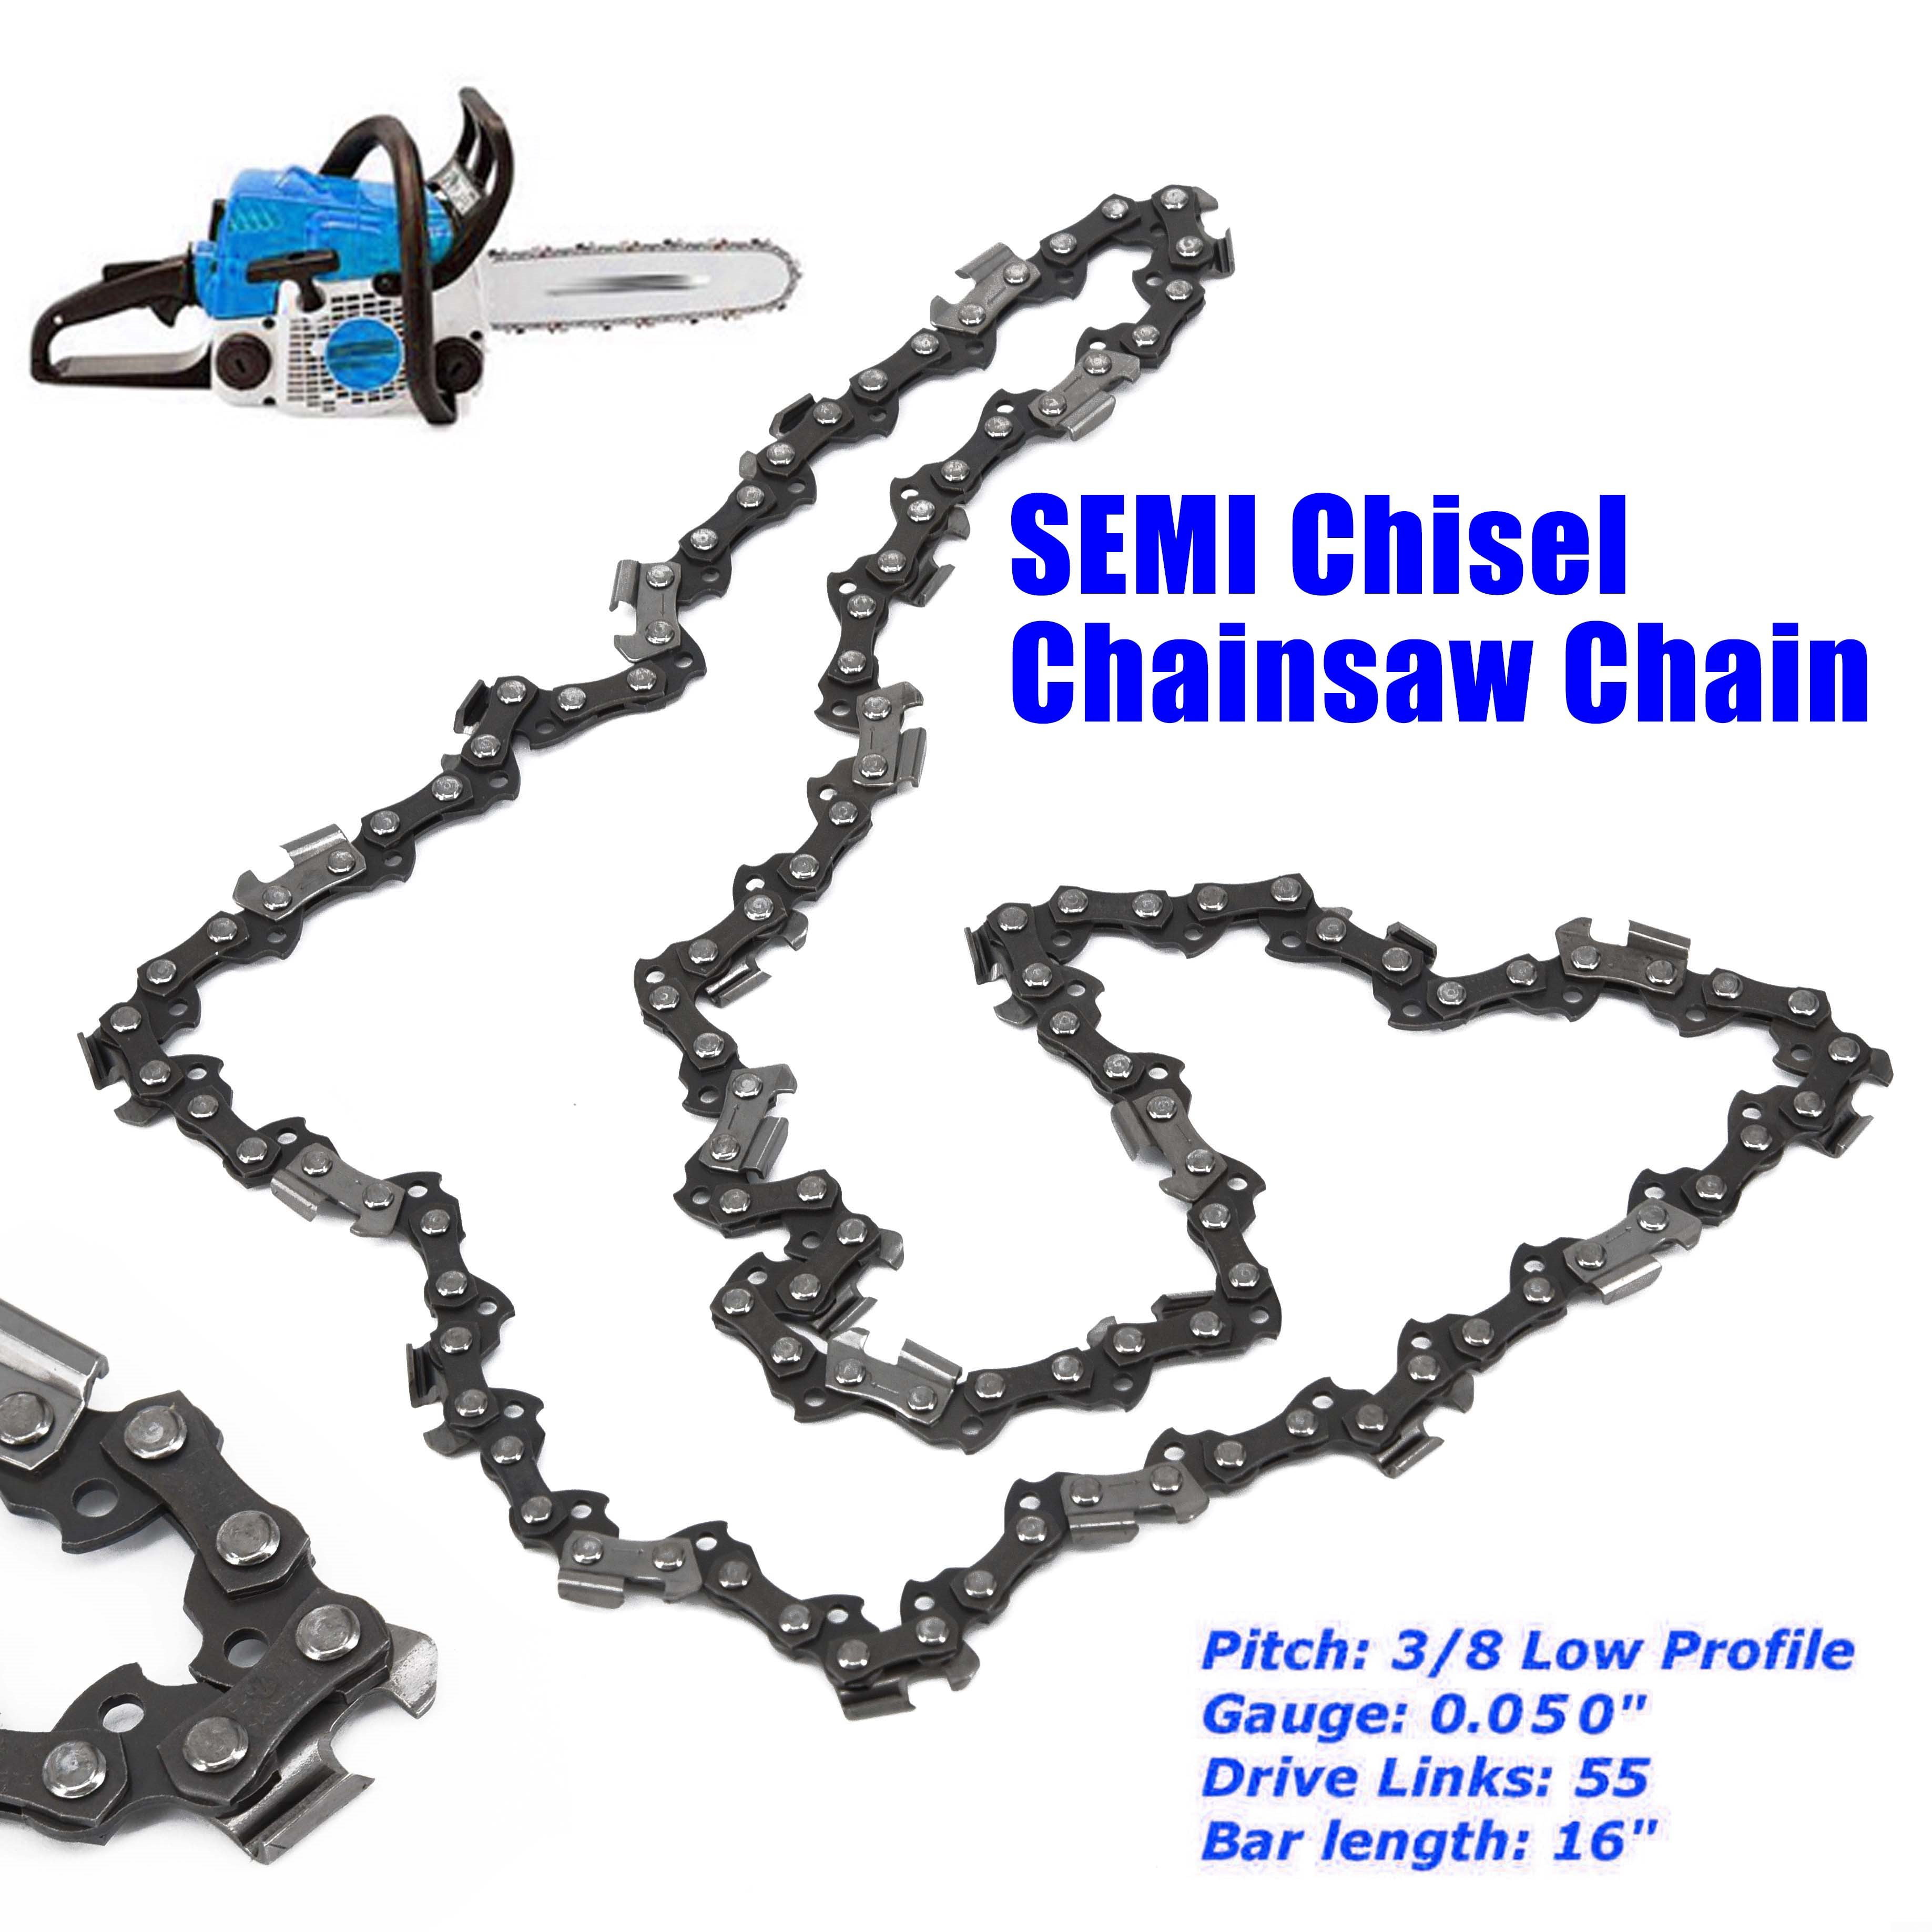 4 Pack Chainsaw Chain 3/8" 0.043 Semi Chisel 55 DL for 16" Stihl MS170C MS171